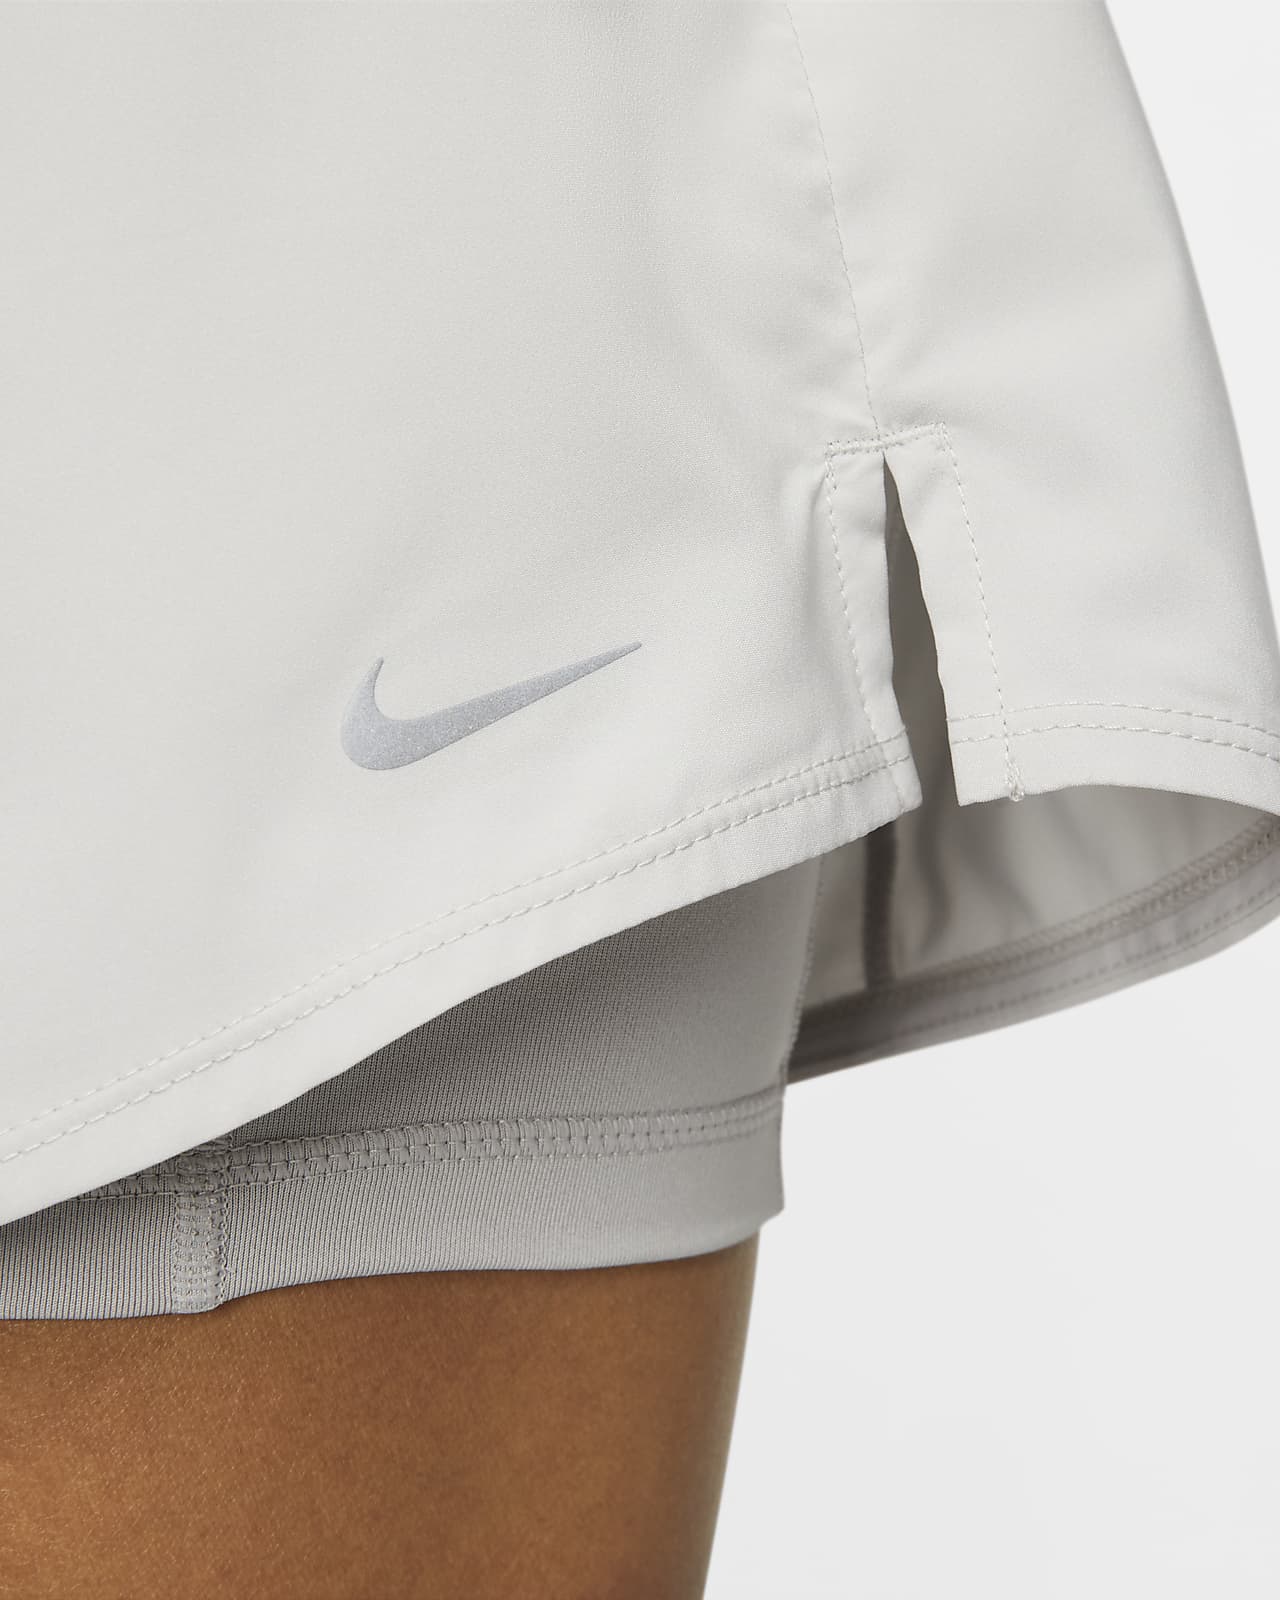 Nike One Women's Dri-FIT High-Waisted 8cm (approx.) 2-in-1 Shorts. Nike CA